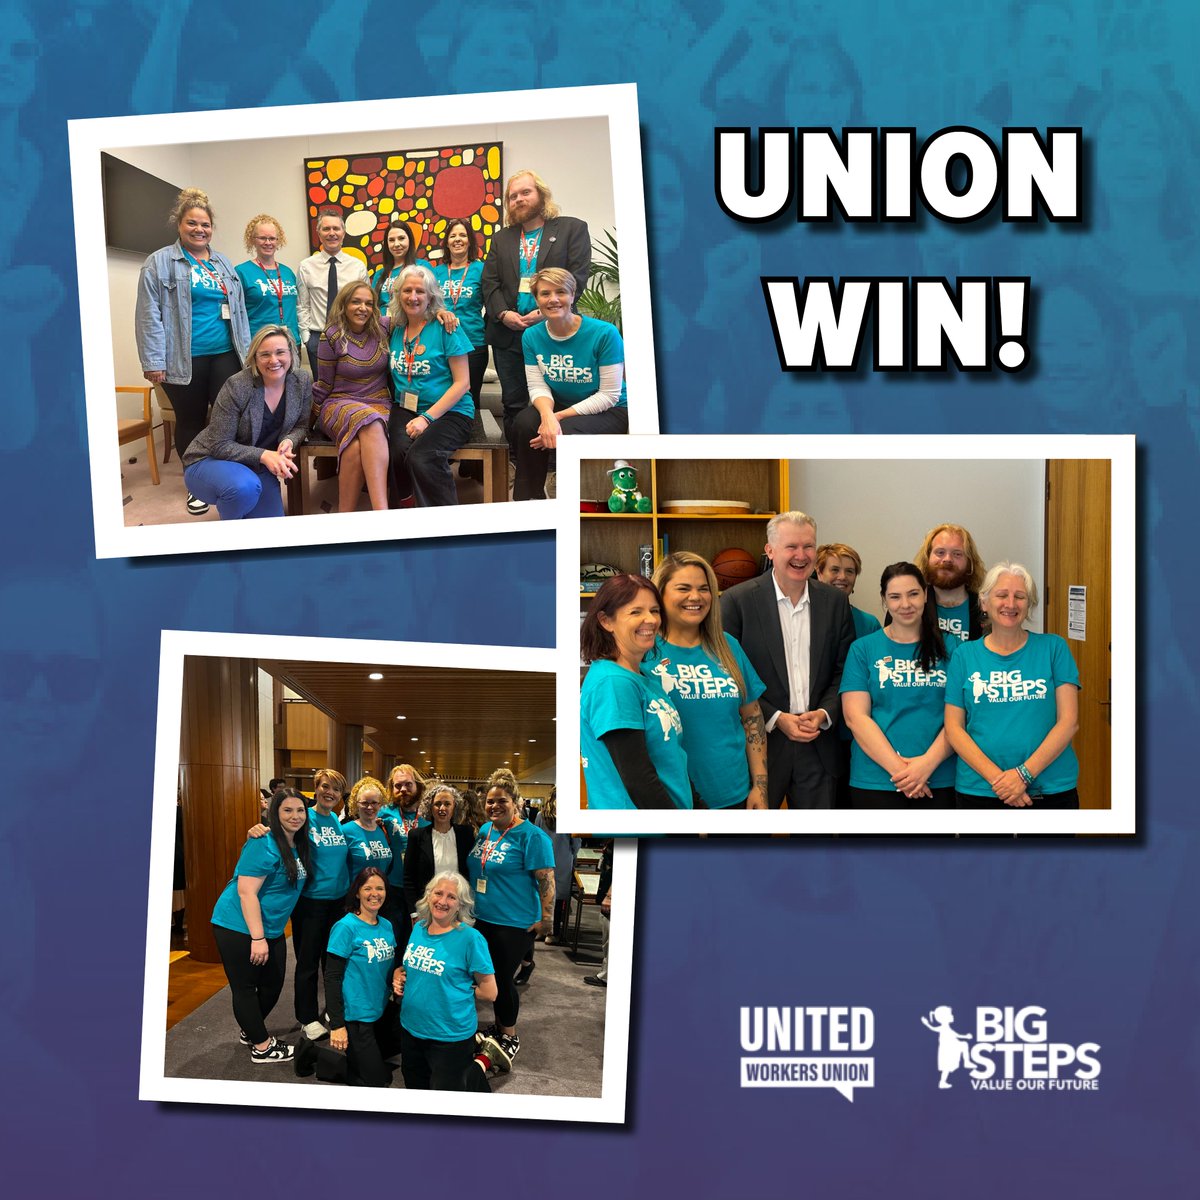 Union win - UWU early education members have been heard! 👏

Labor commits to funding a wage increase for early childhood educators through the new multi-employer agreement! 

#budget24 #auspol #ausunions